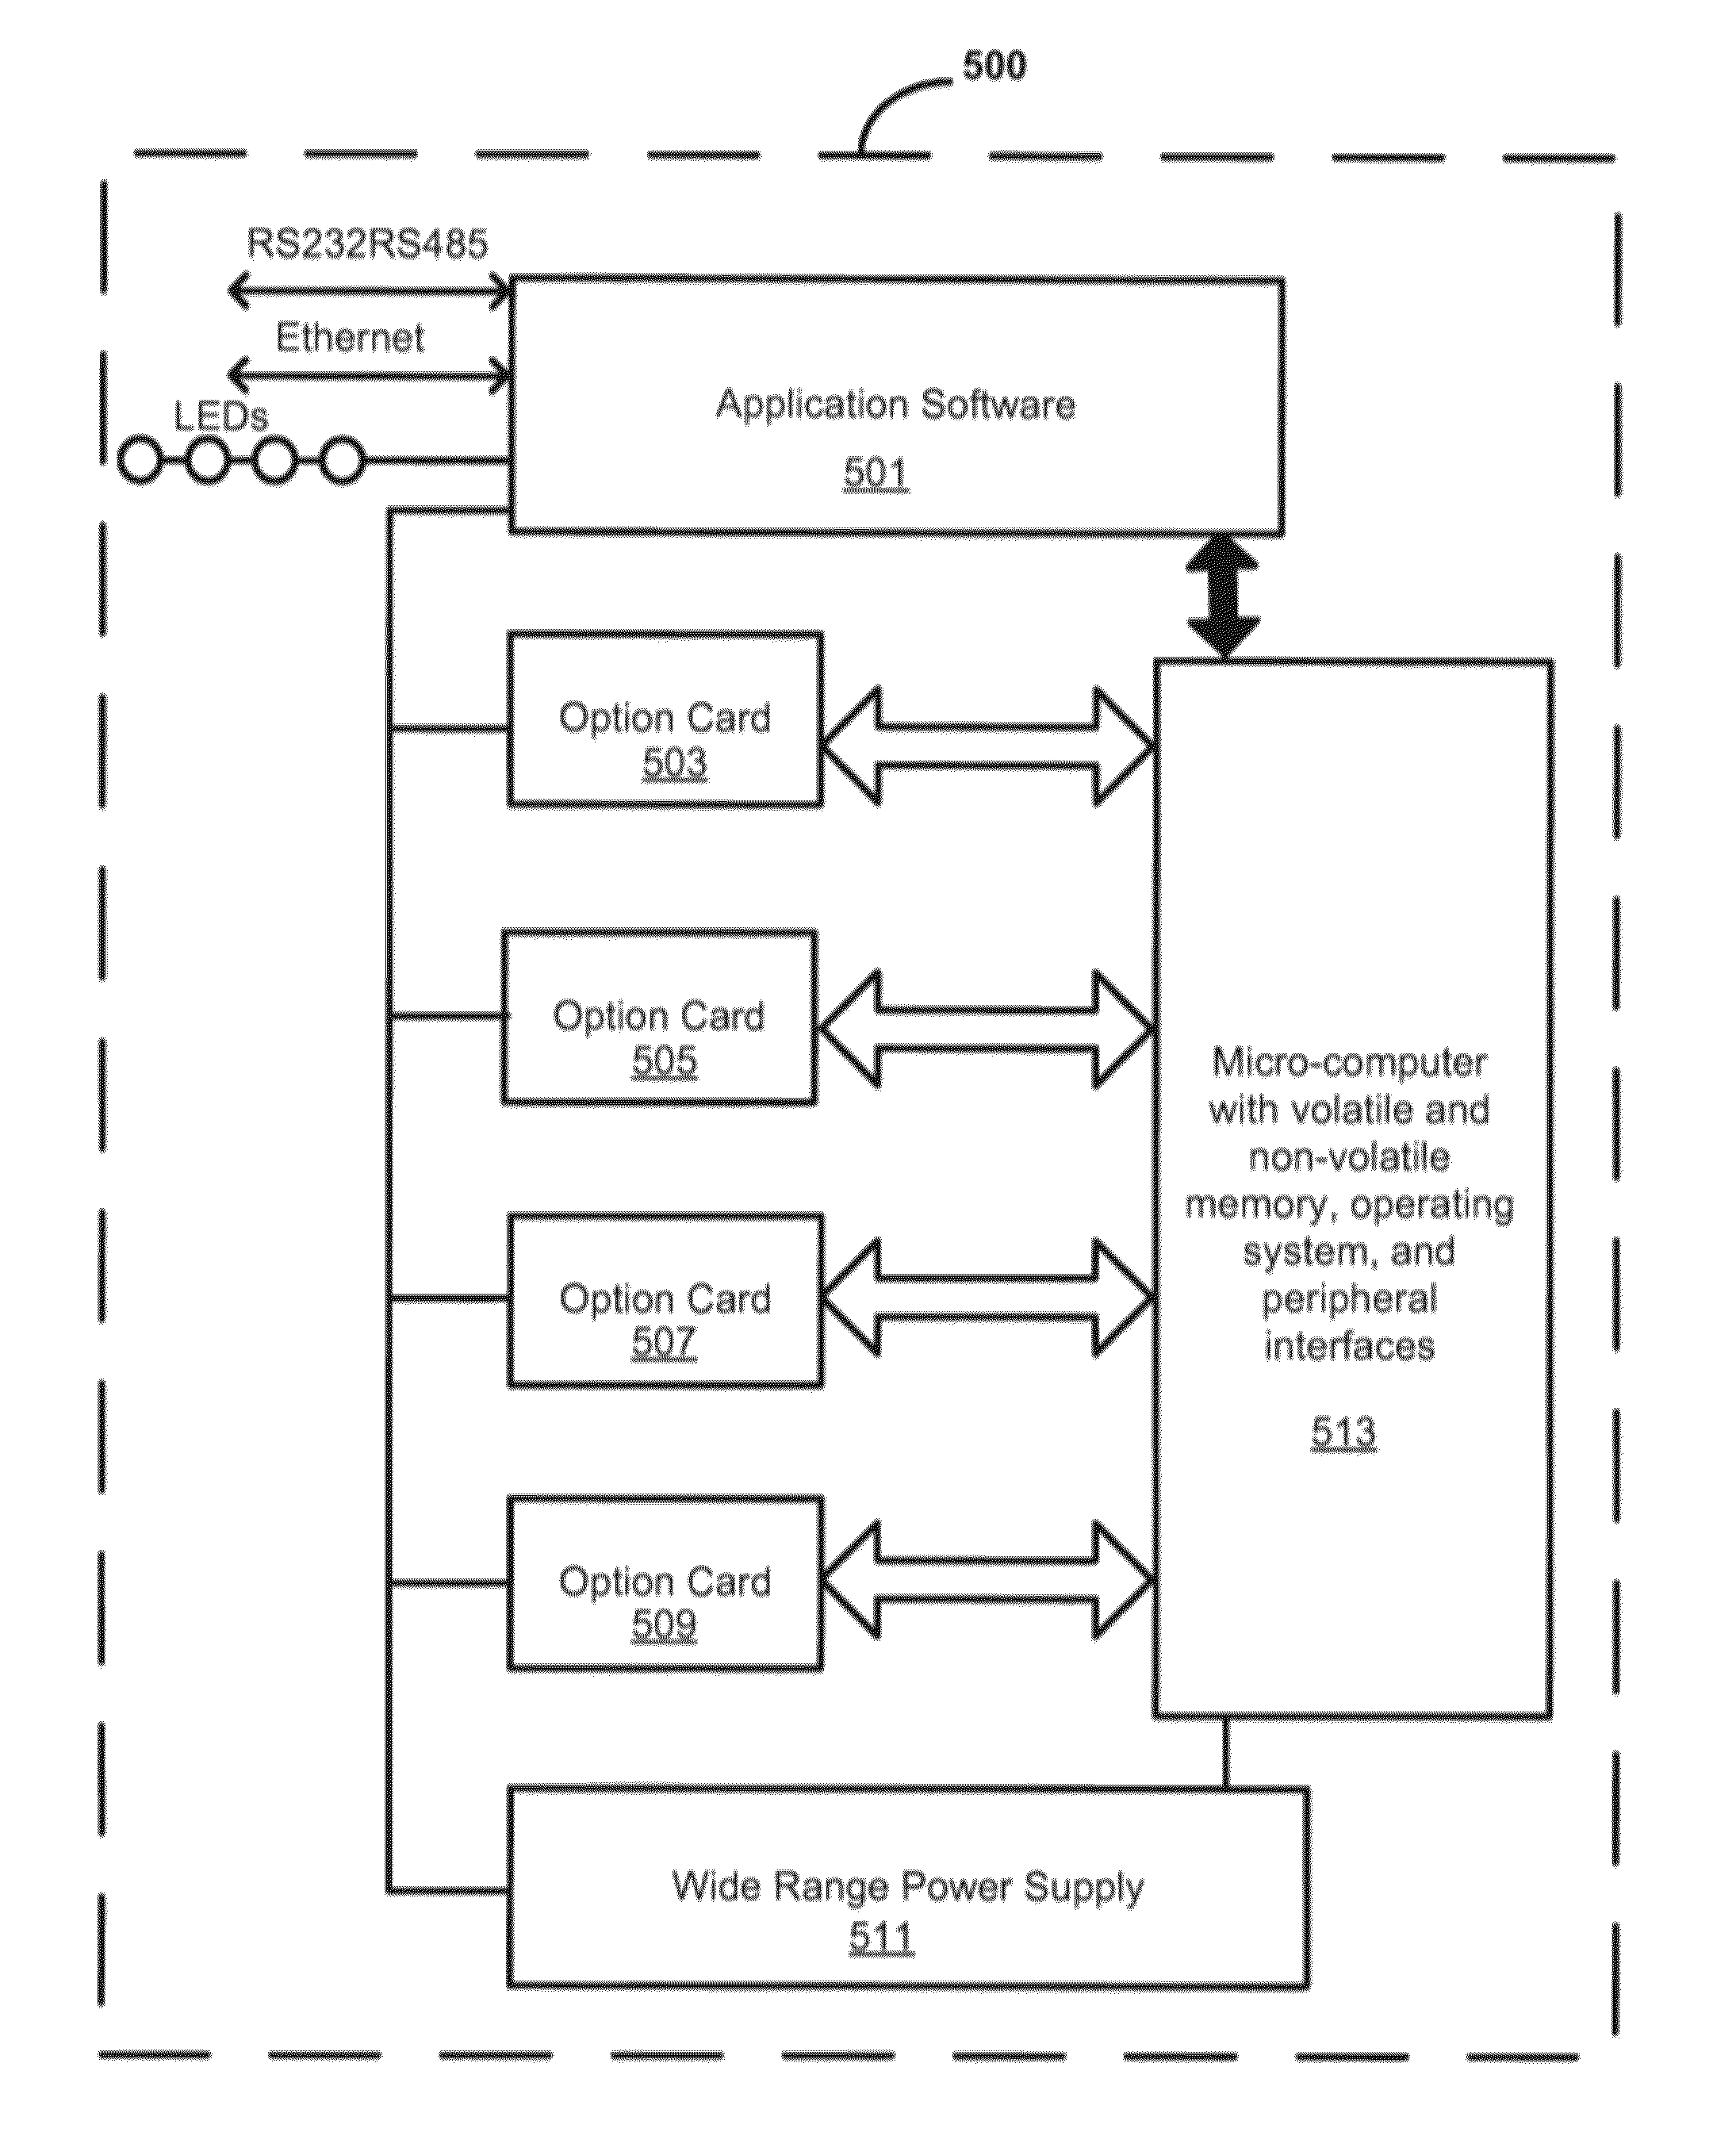 Interface bus for utility-grade network communication devices